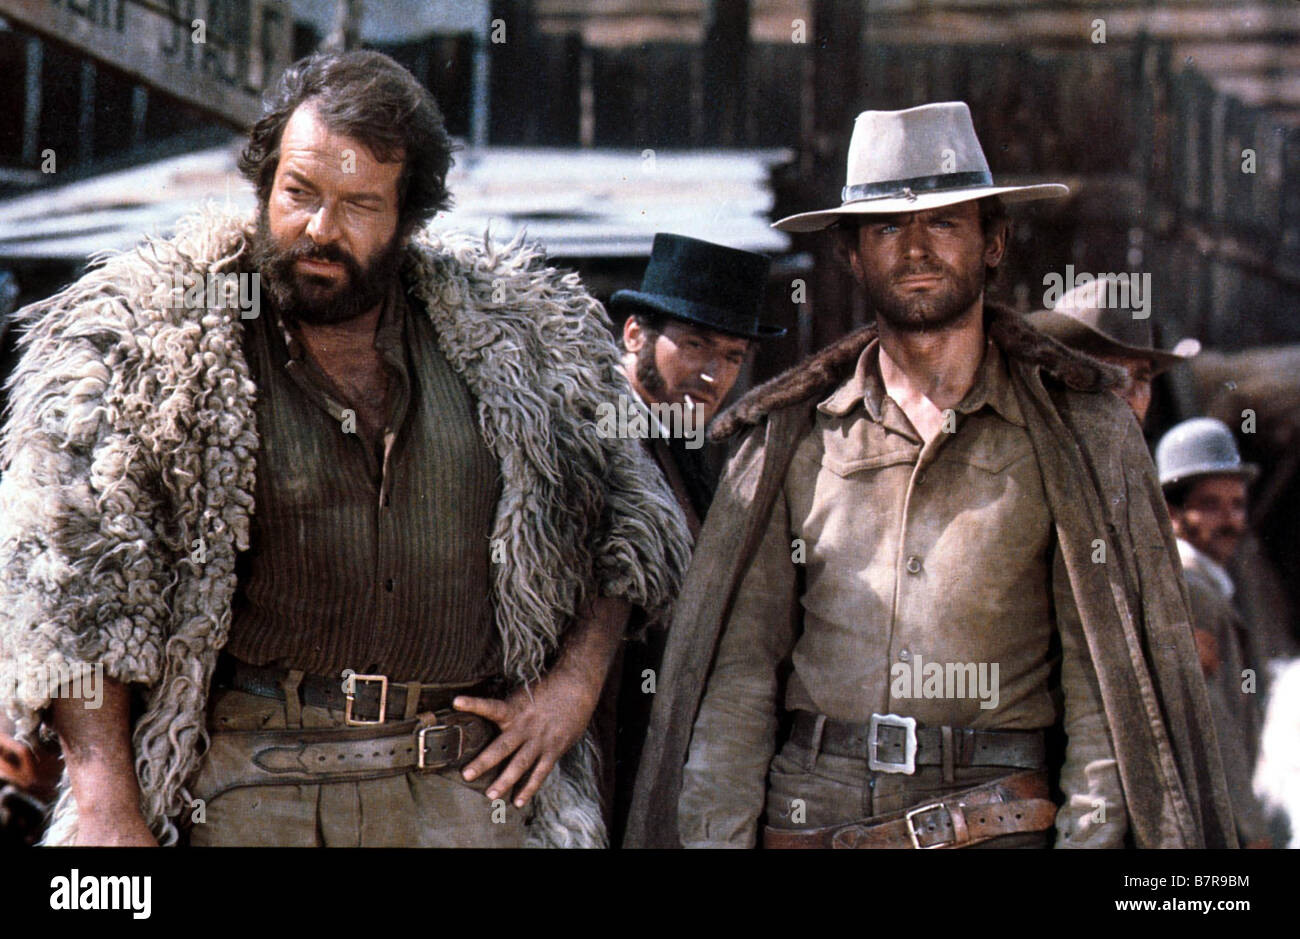 Bud Spencer Terence Hill High Resolution Stock Photography and Images -  Alamy